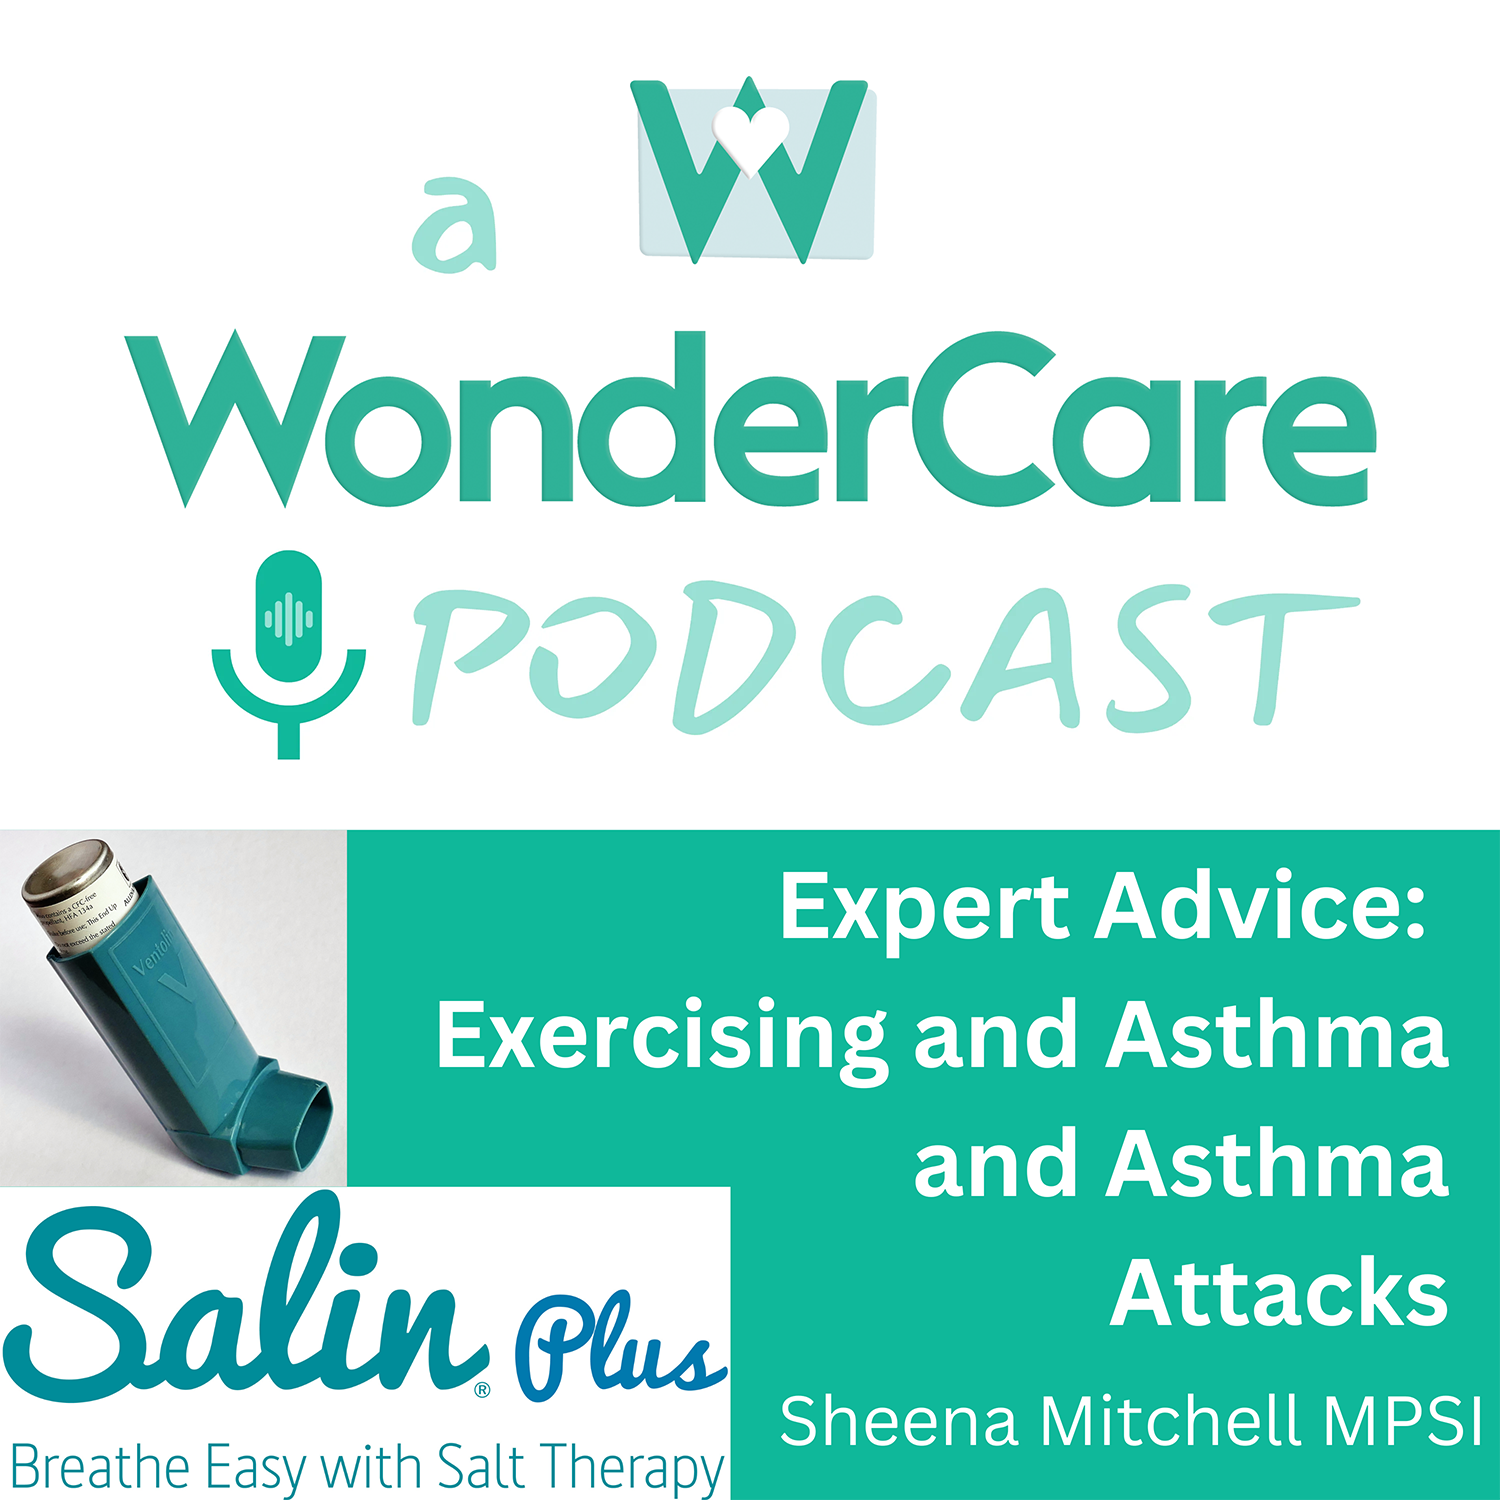 Expert Advice: Exercising with Asthma and Asthma Attacks